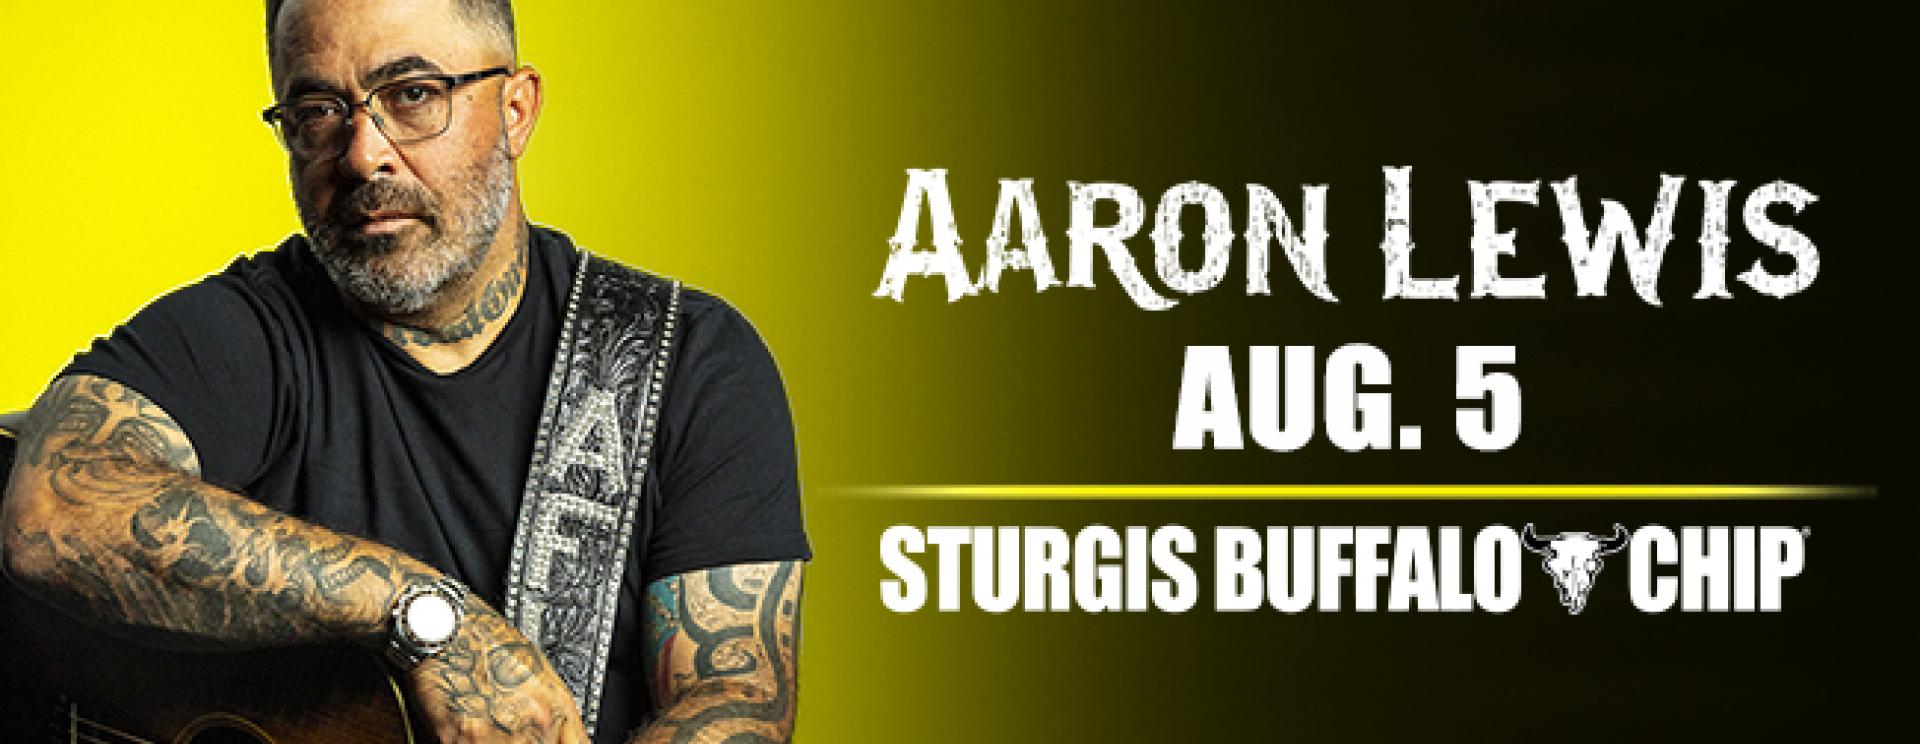 Aaron Lewis at the Sturgis Buffalo Chip